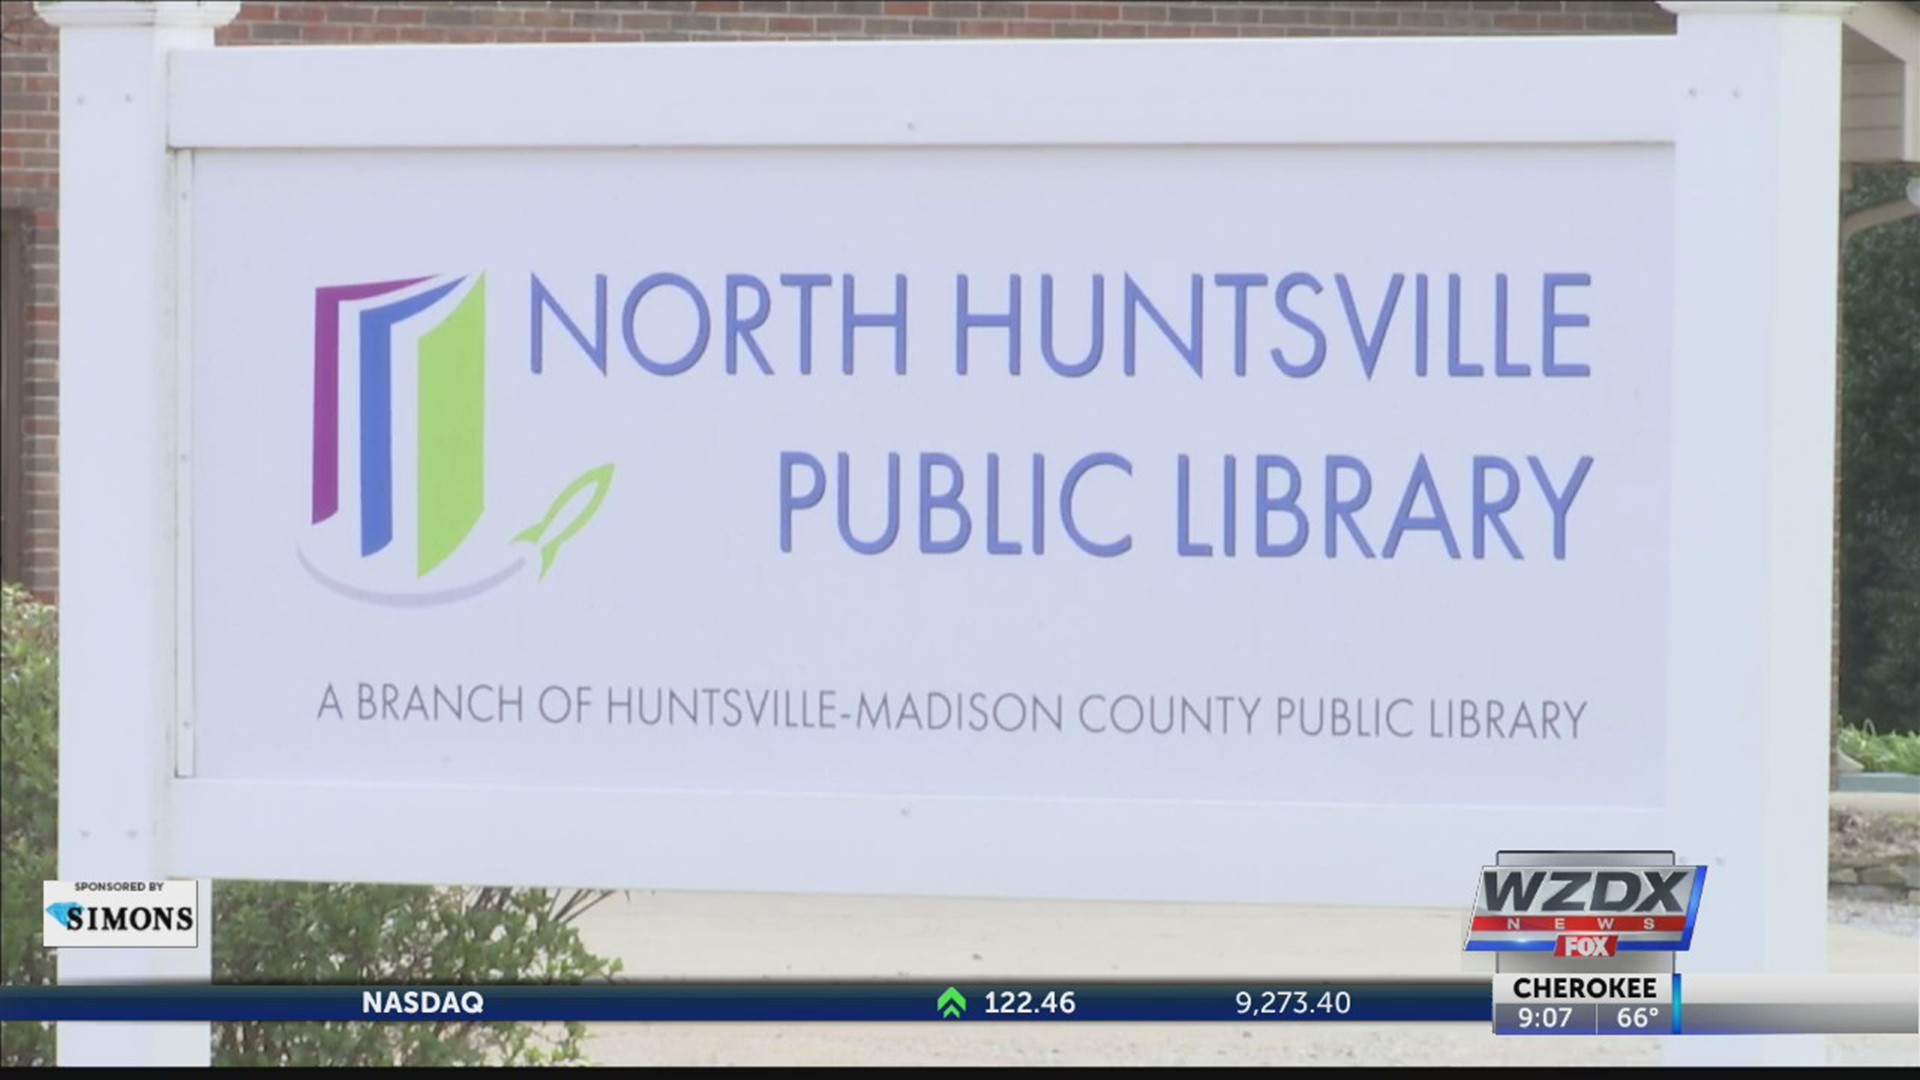 "The building does face toward Sparkman Drive here, So it has patrons pull in so they'll be looking right at the front door," said Huntsville Director of General Services Ricky Wilkinson.